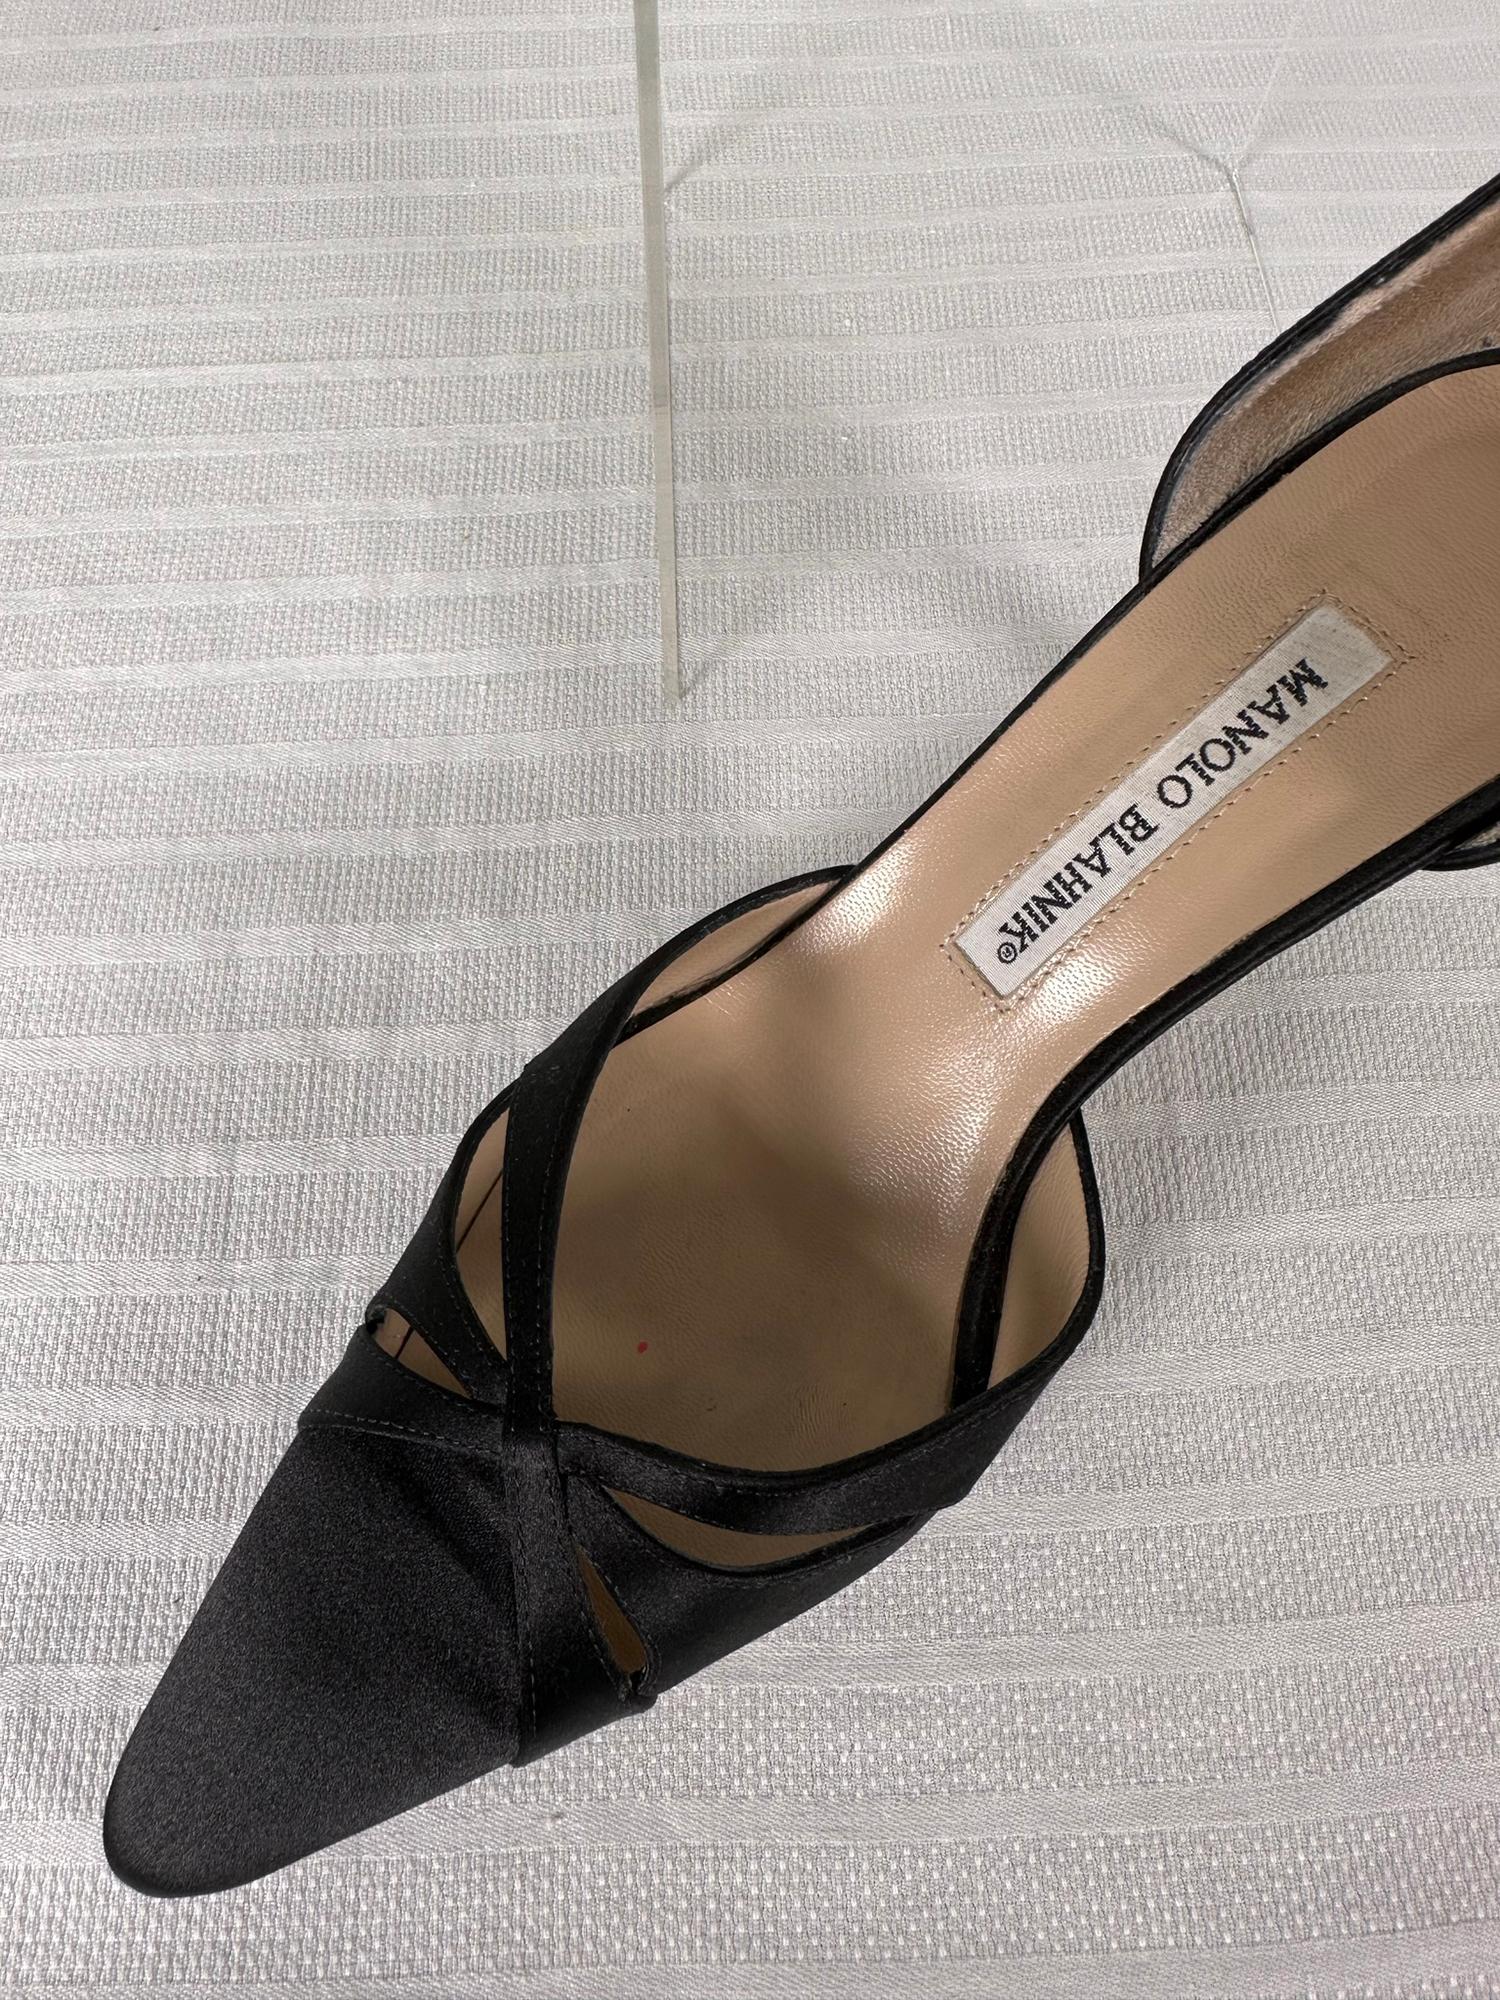 Manolo Blahnik black satin butterfly D' Orsay high heel pumps marked size 7 1/2. Beautiful shoes leather lined with leather soles. Open work satin design at the fronts look like butterfly wings. Previously owned & well cared for, comes with